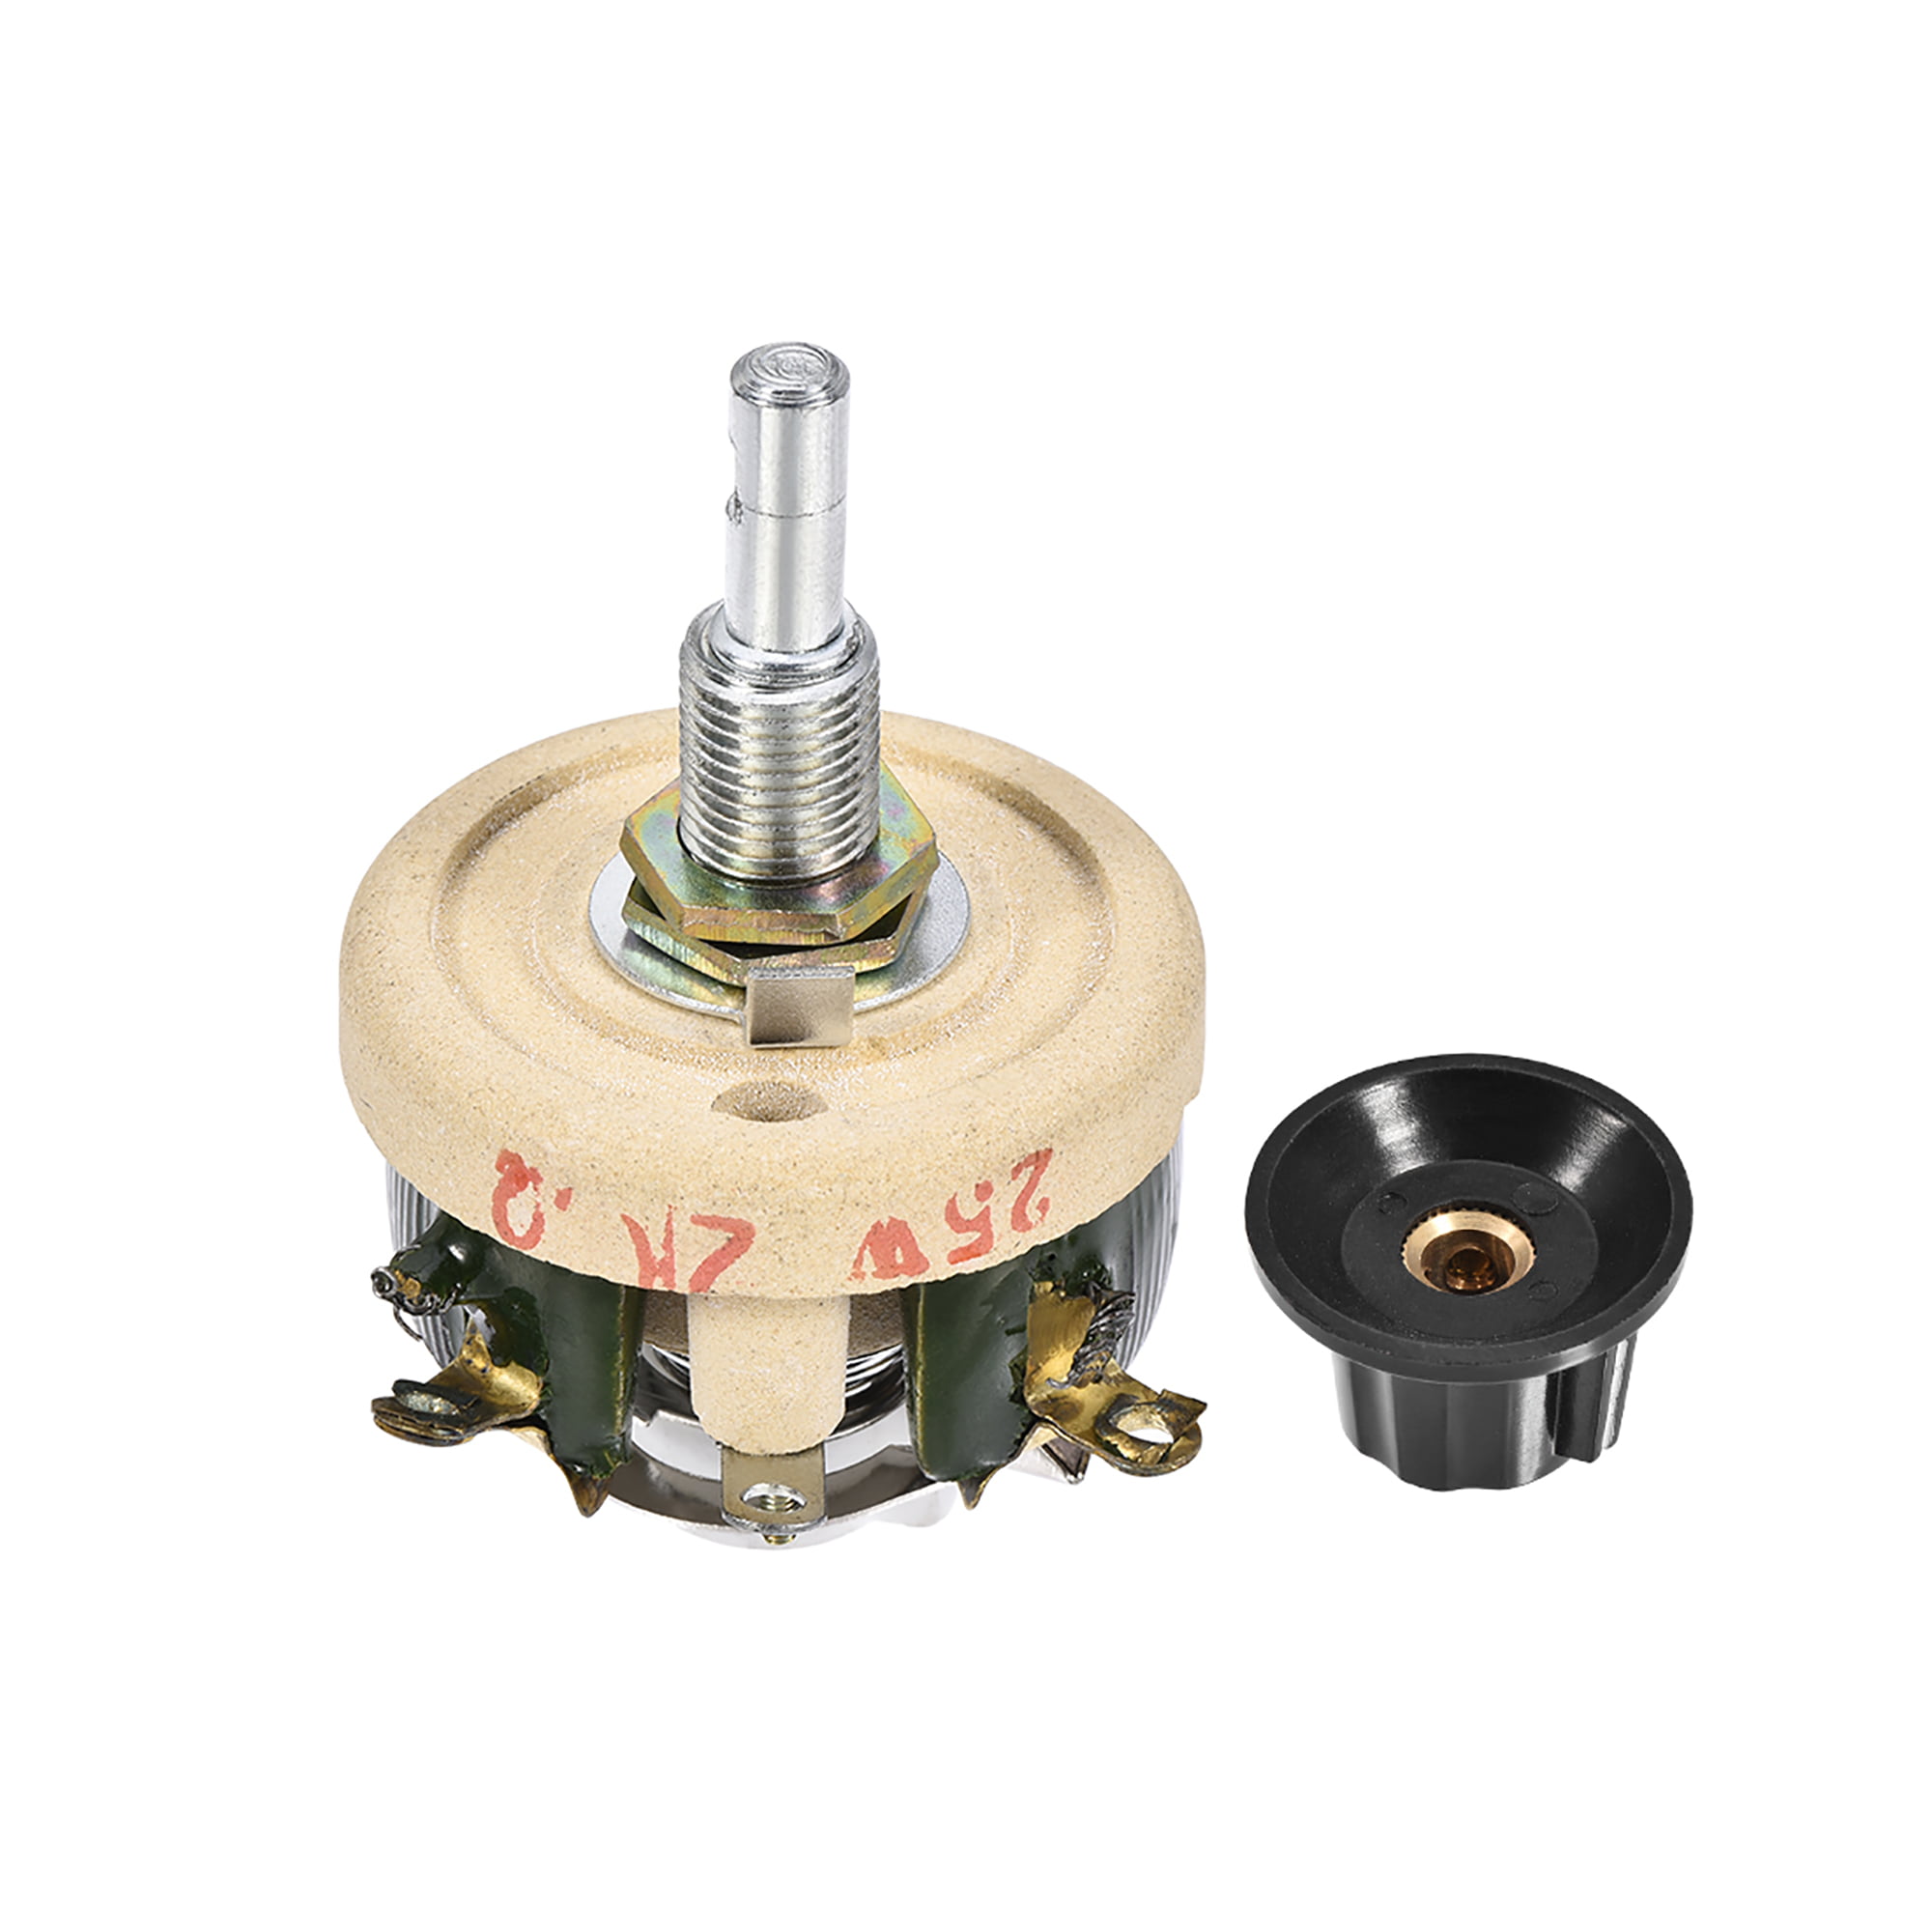 uxcell Wirewound Ceramic Potentiometer Variable Rheostat Resistor 150W 200R Ohm with Knobs 